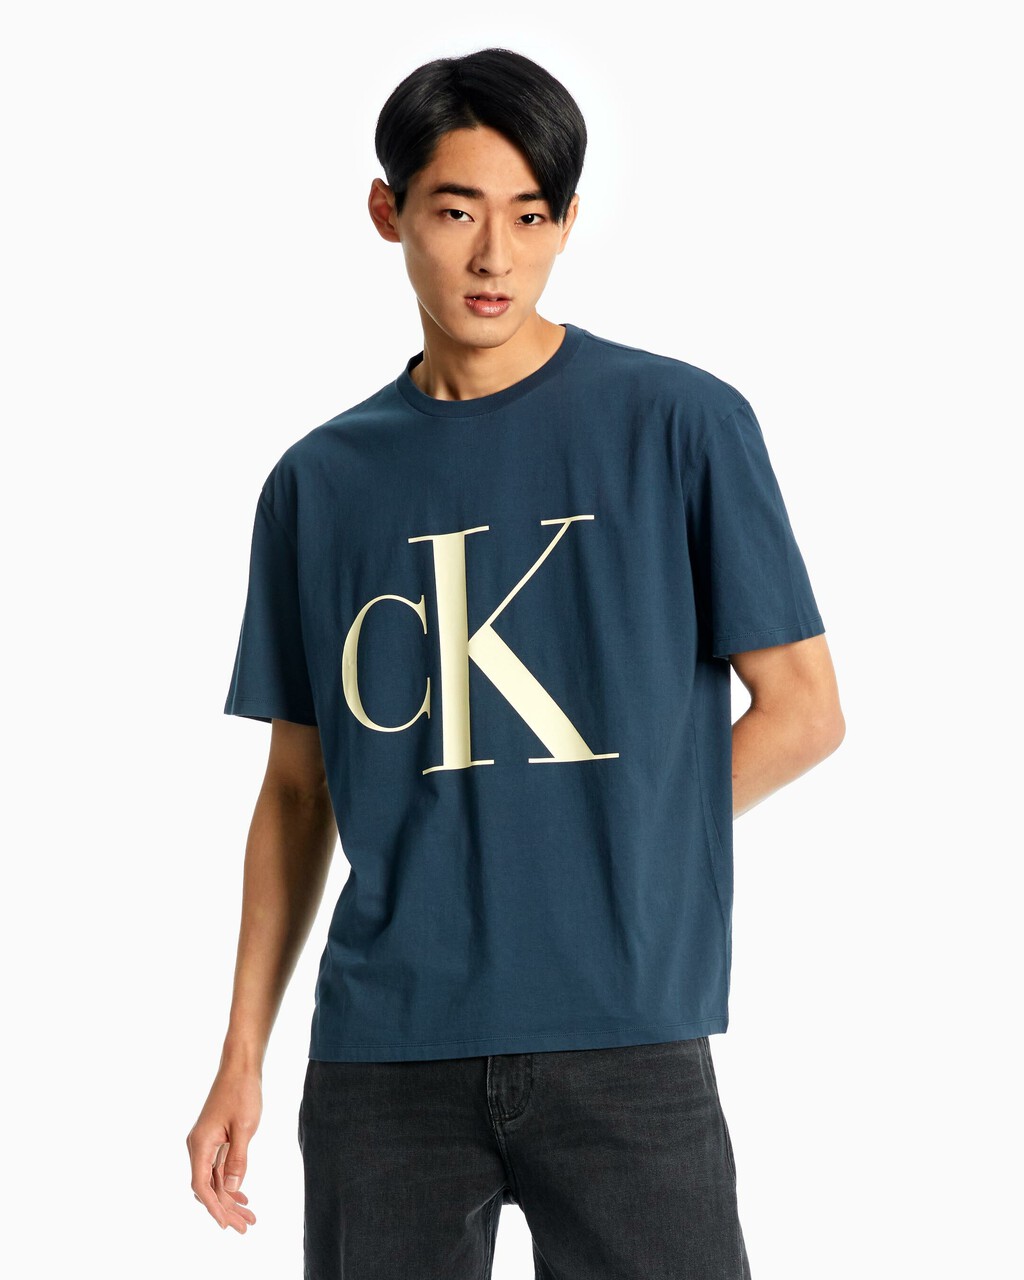 MONOGRAM RELAXED FIT TEE, INK-410PPK, hi-res